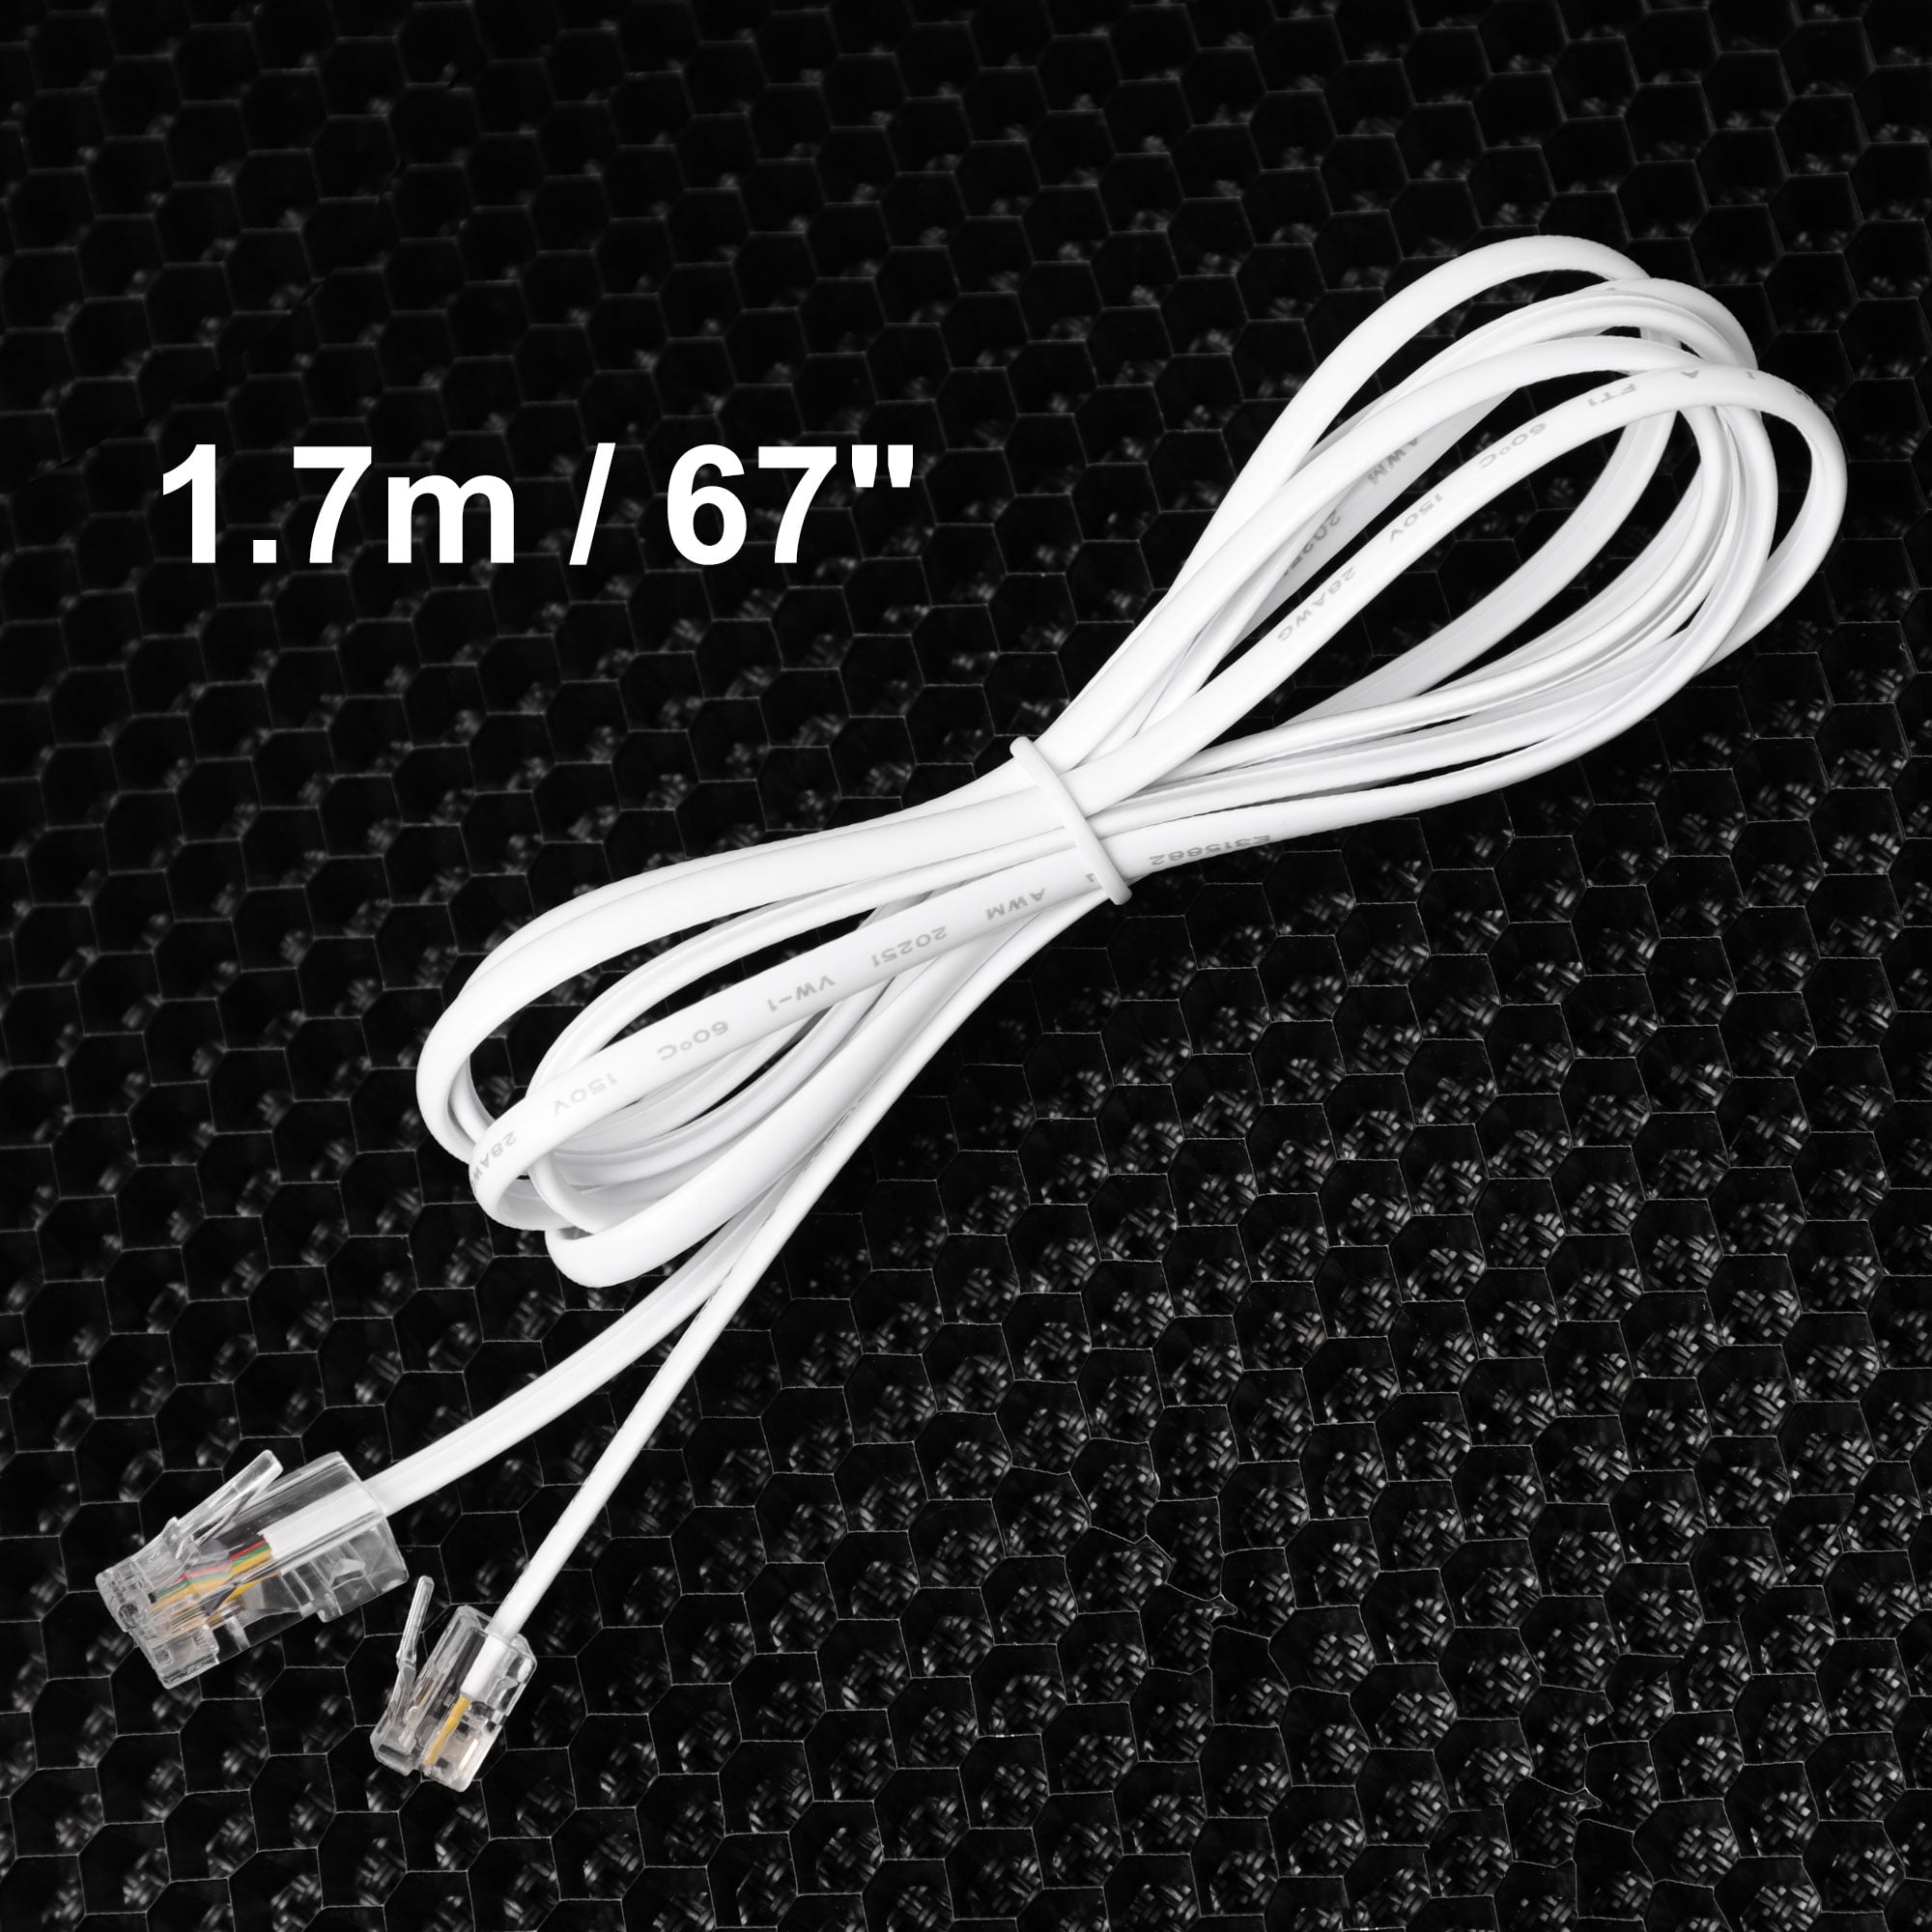  RJ45 to RJ11 Cable, 6 Feet Phone Jack to Ethernet Adapter RJ11  6P4C Male to RJ45 8P8C Male Connector Plug Cord for Landline Telephone :  Electronics